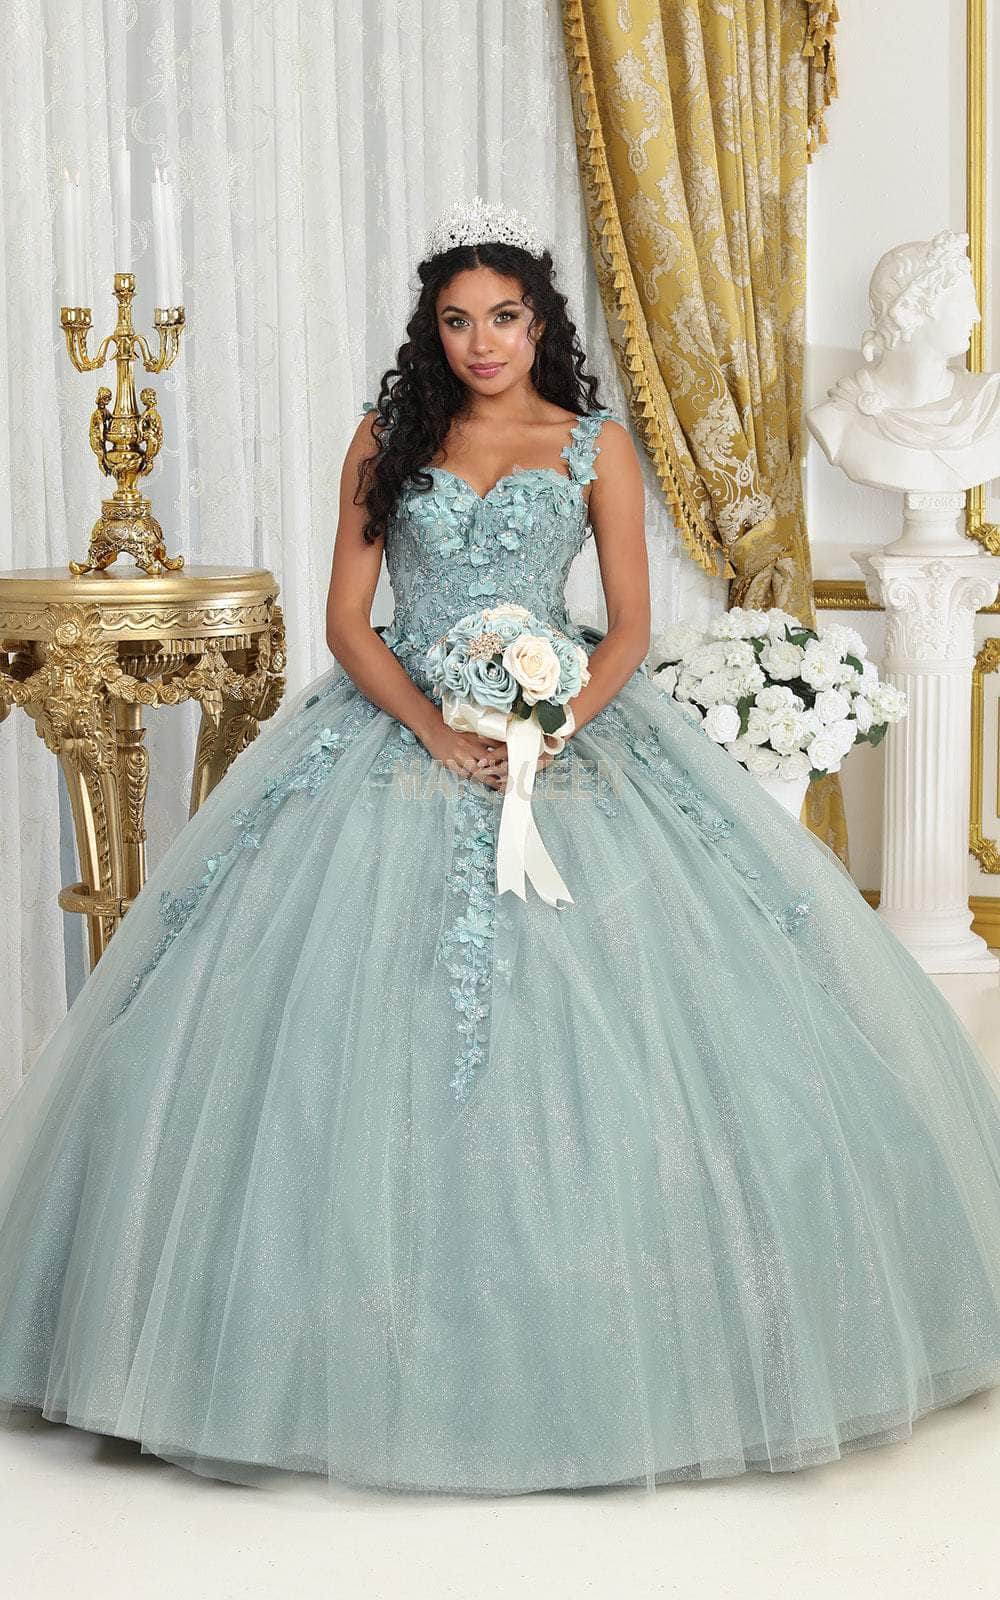 Image of May Queen LK235 - Sweetheart Embellished Ballgown